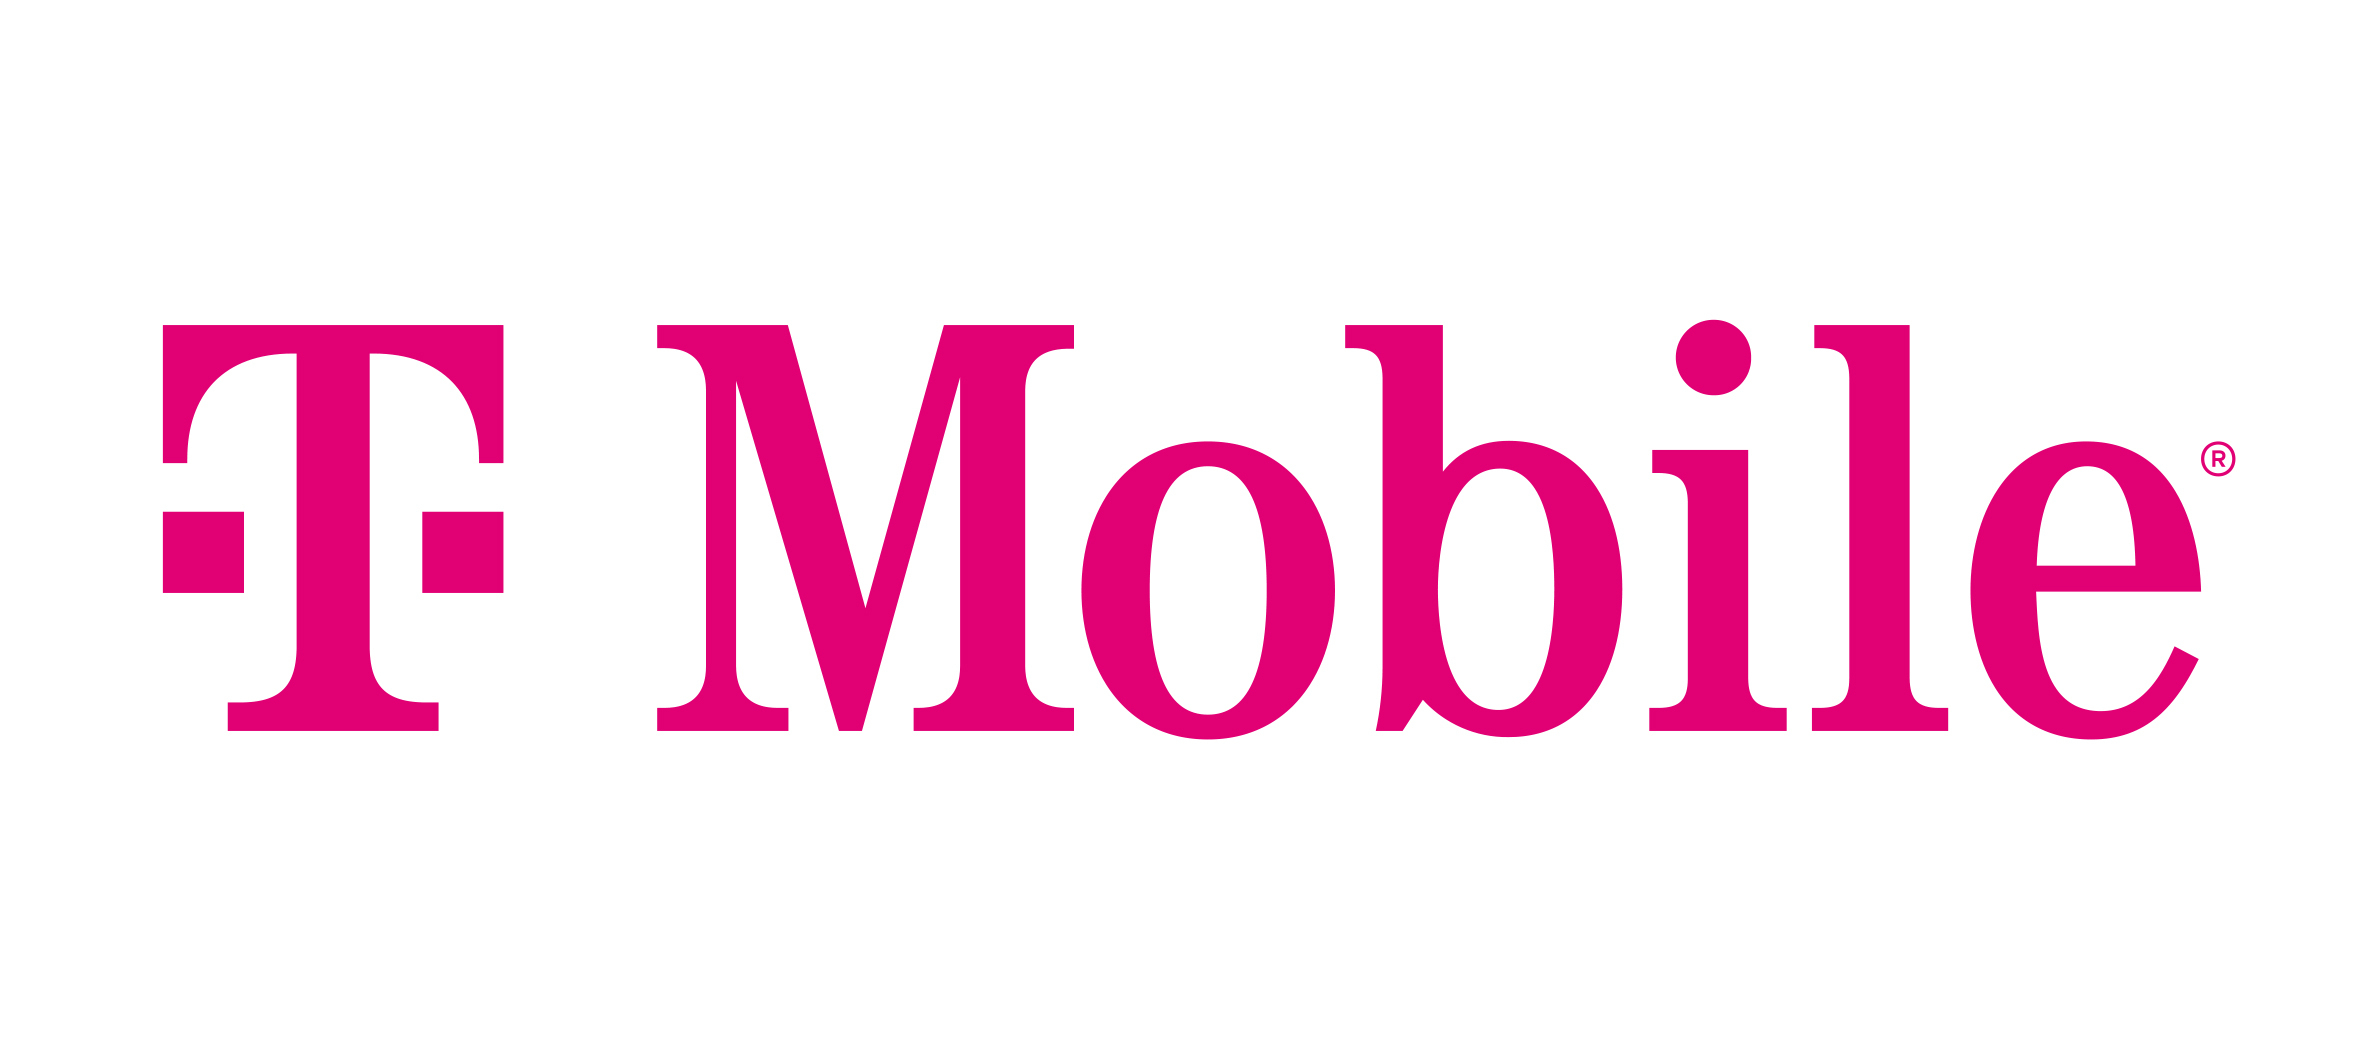 Here's what to know about T-Mobile's new TV service as it takes on cable  incumbents – GeekWire